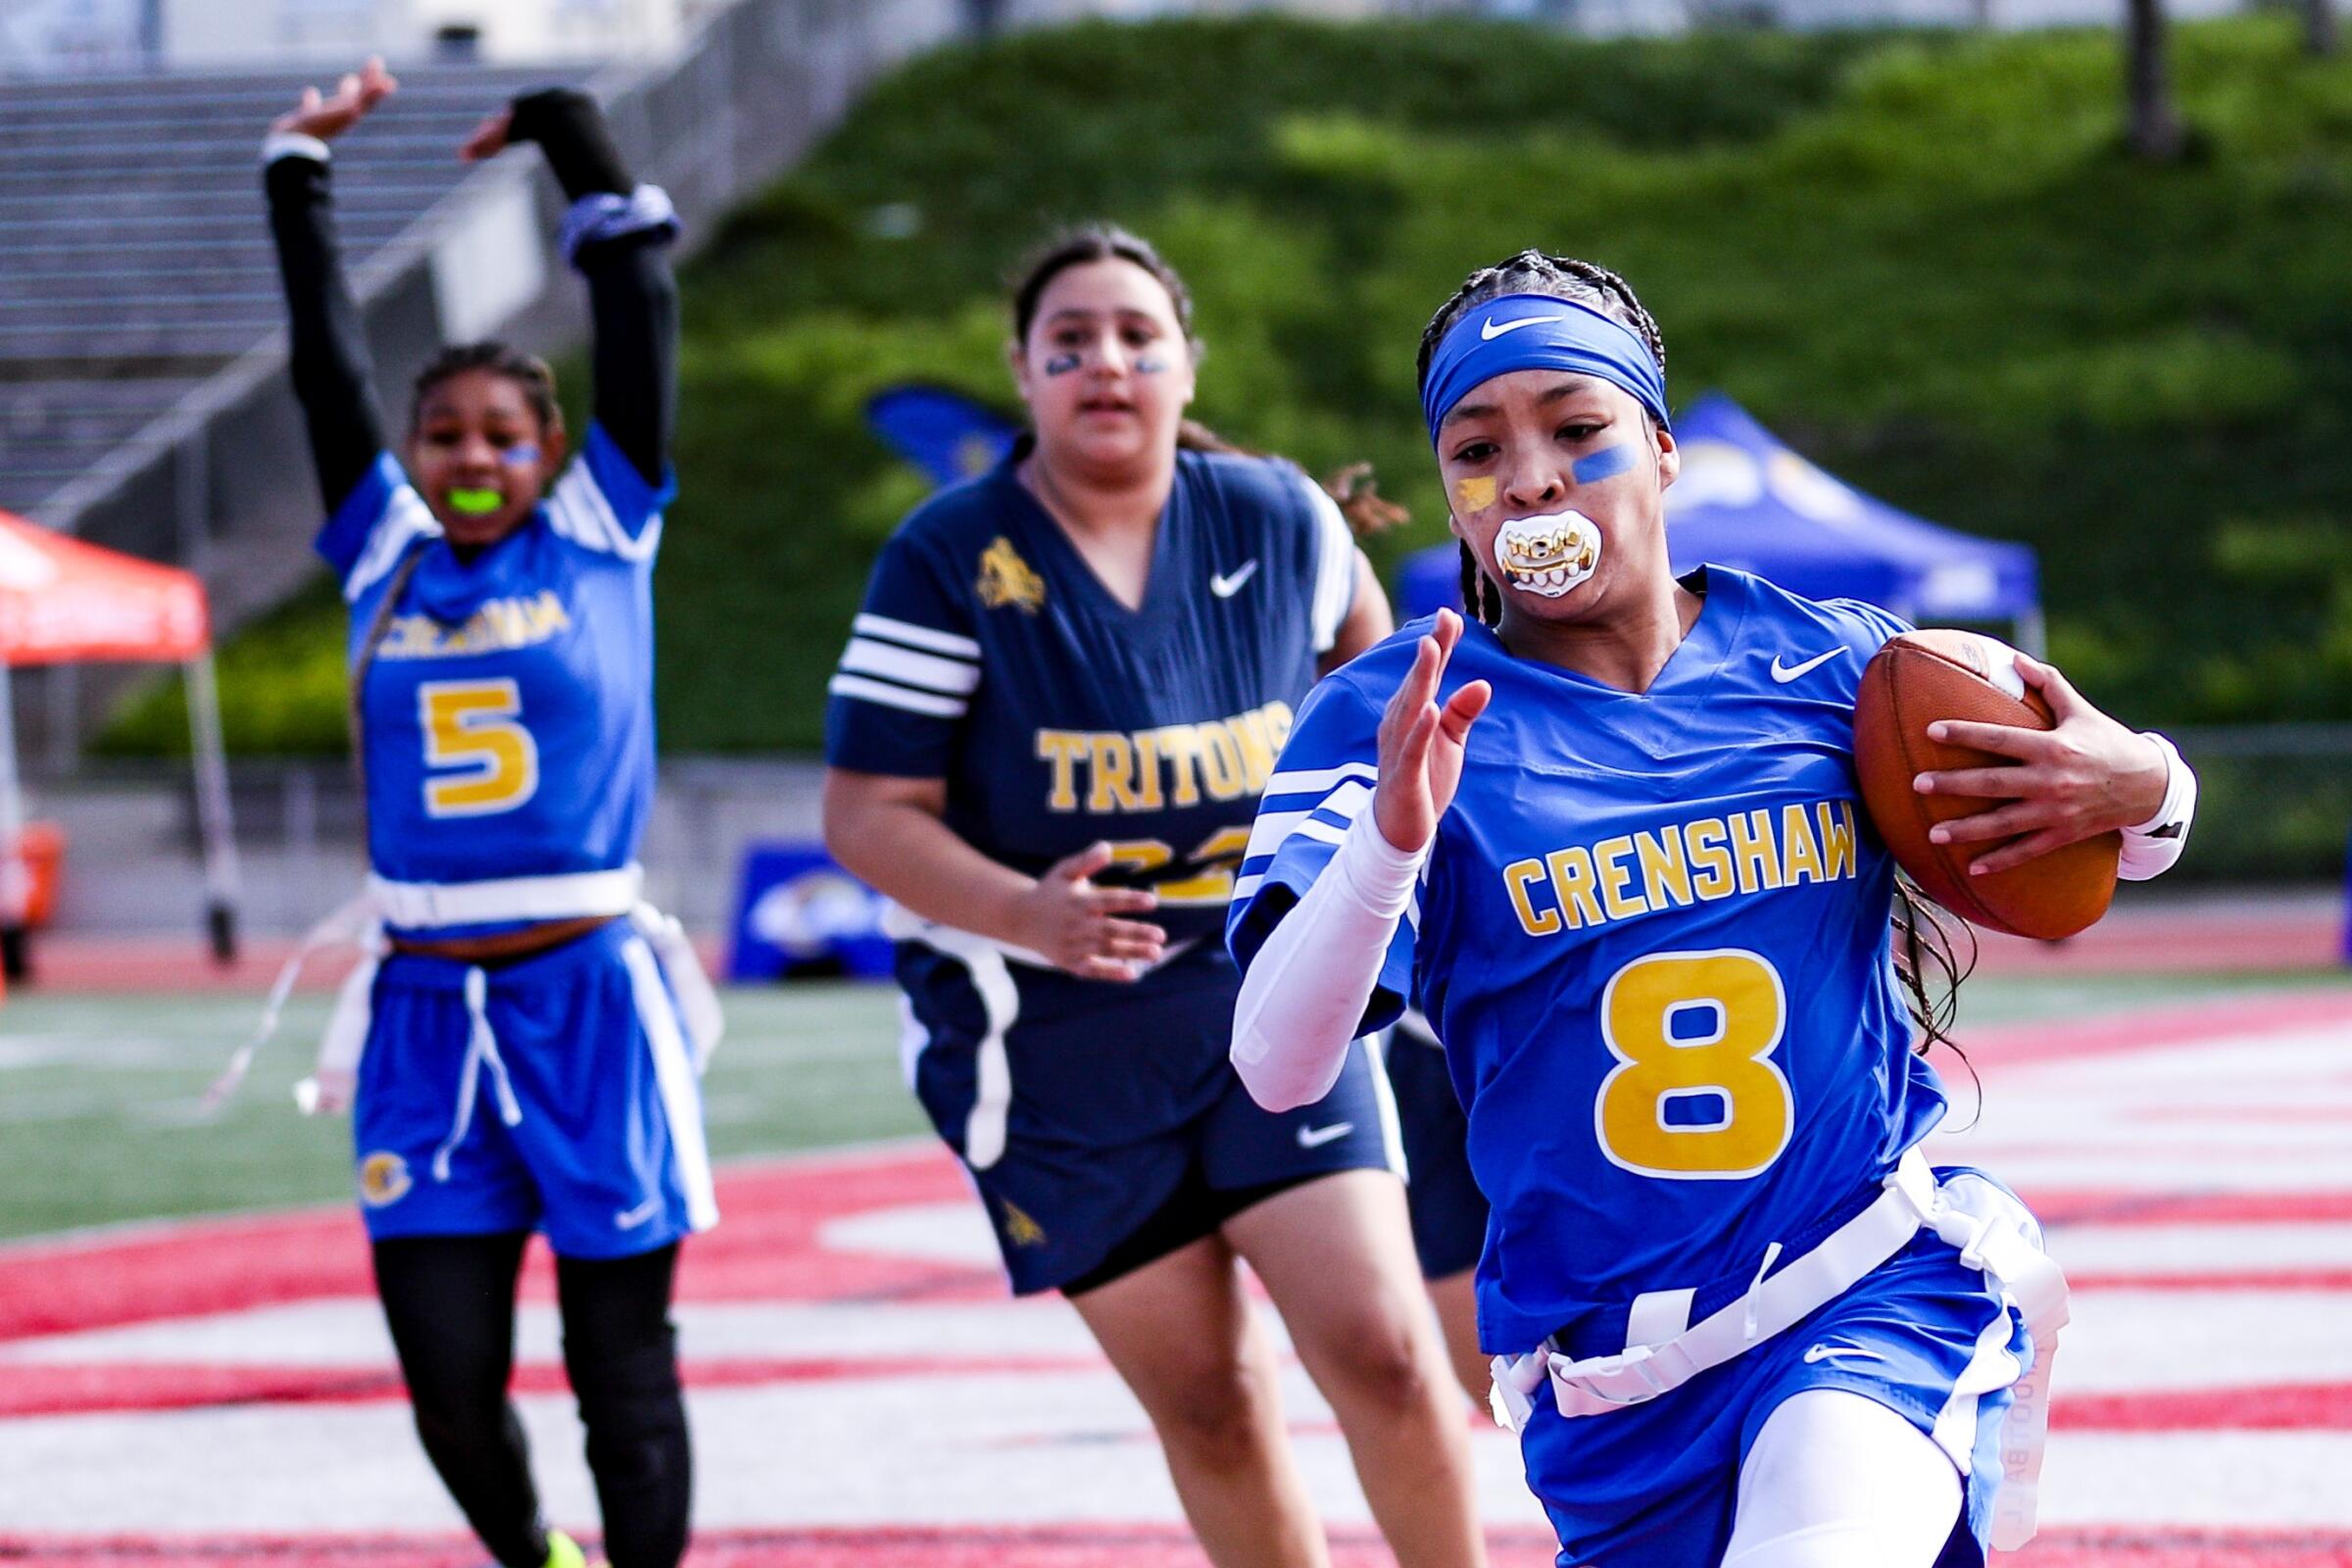 Crenshaw High's De'Chelle Bracket takes off down the sideline during a League of Champions local flag football game.